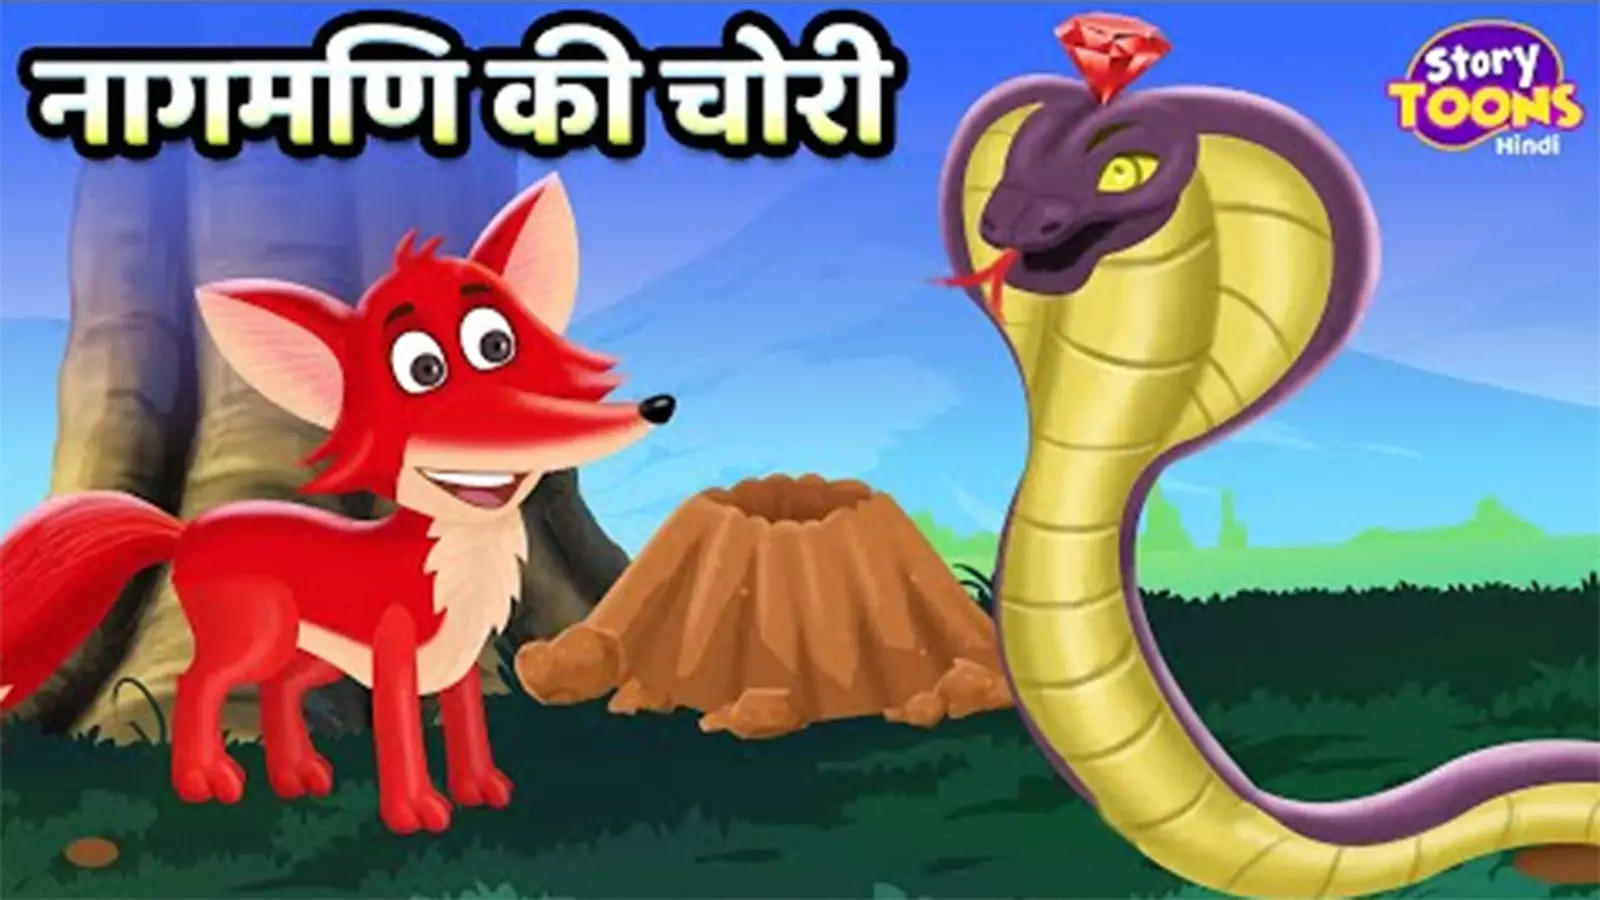 Watch Latest Children Hindi Story 'Nagmani Ki Chori' For Kids - Check Out  Kids's Nursery Rhymes And Baby Songs In Hindi | Entertainment - Times of  India Videos